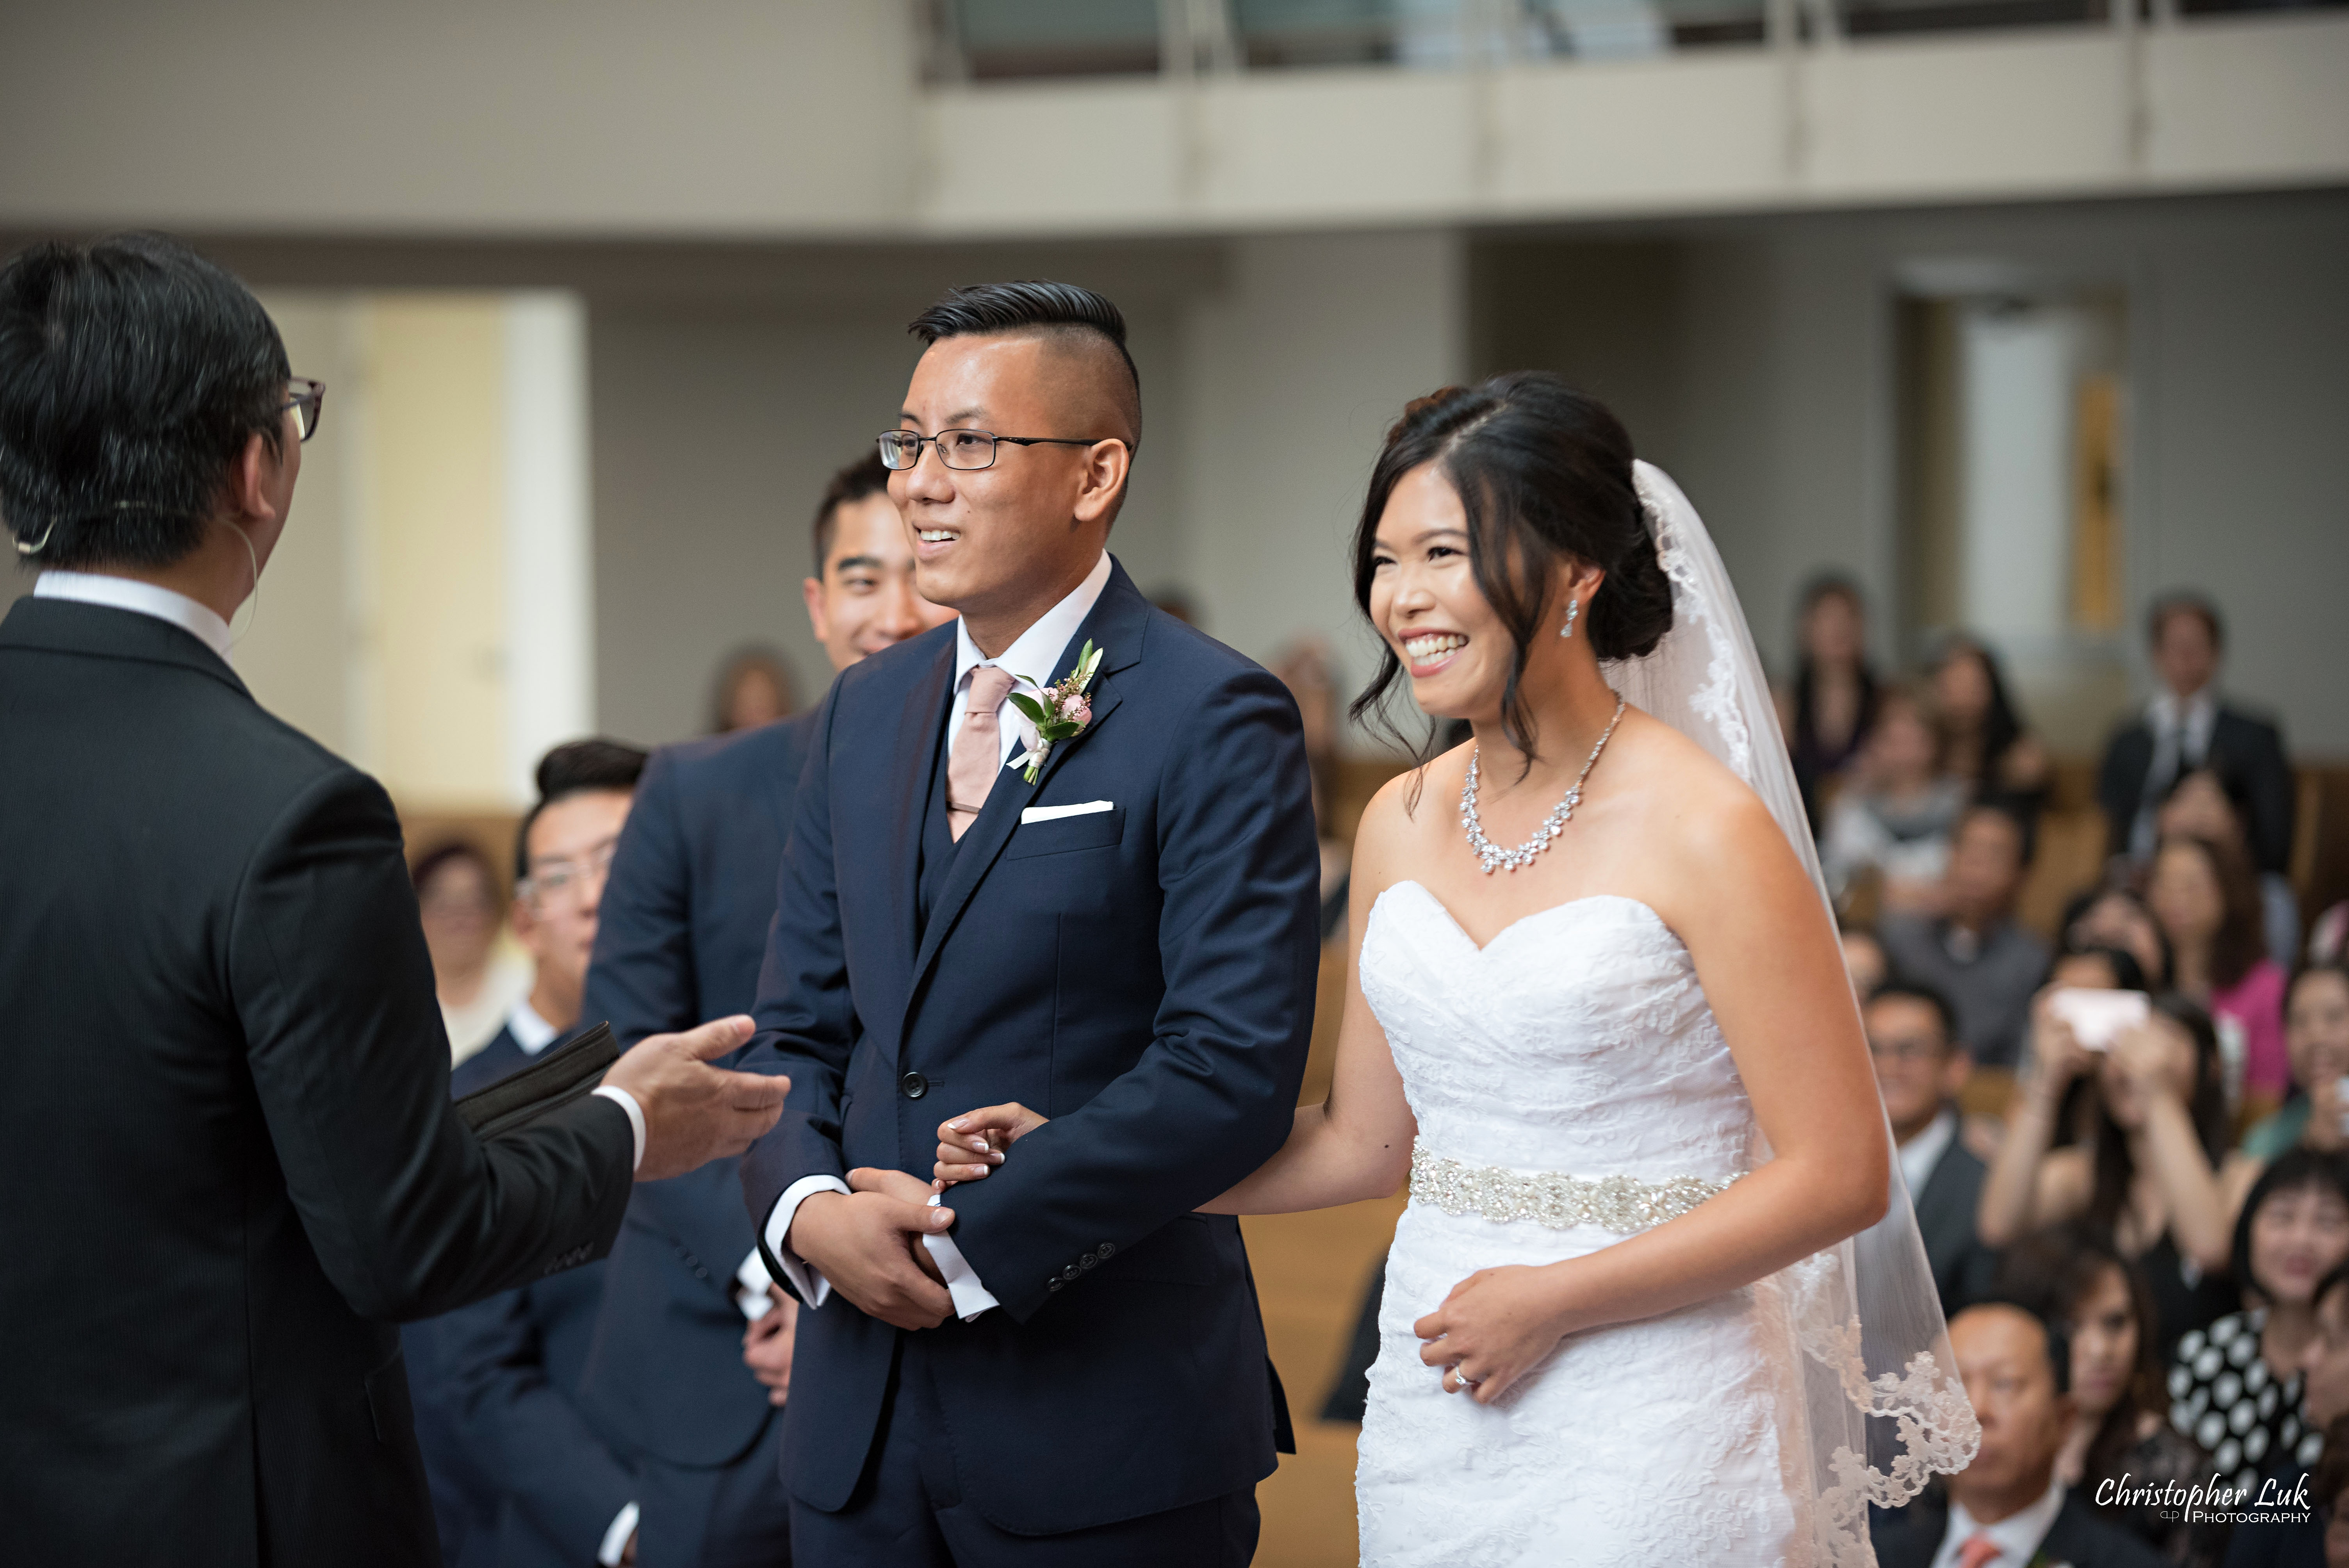 Christopher Luk - Toronto Wedding Photographer - Markham Chinese Baptist Church MCBC Christian Ceremony - Natural Candid Photojournalistic Bride Groom Pastor Officiant Sermon Message Exhortation Homily Cute Sweet Moment Holding Hands Reaction Laugh